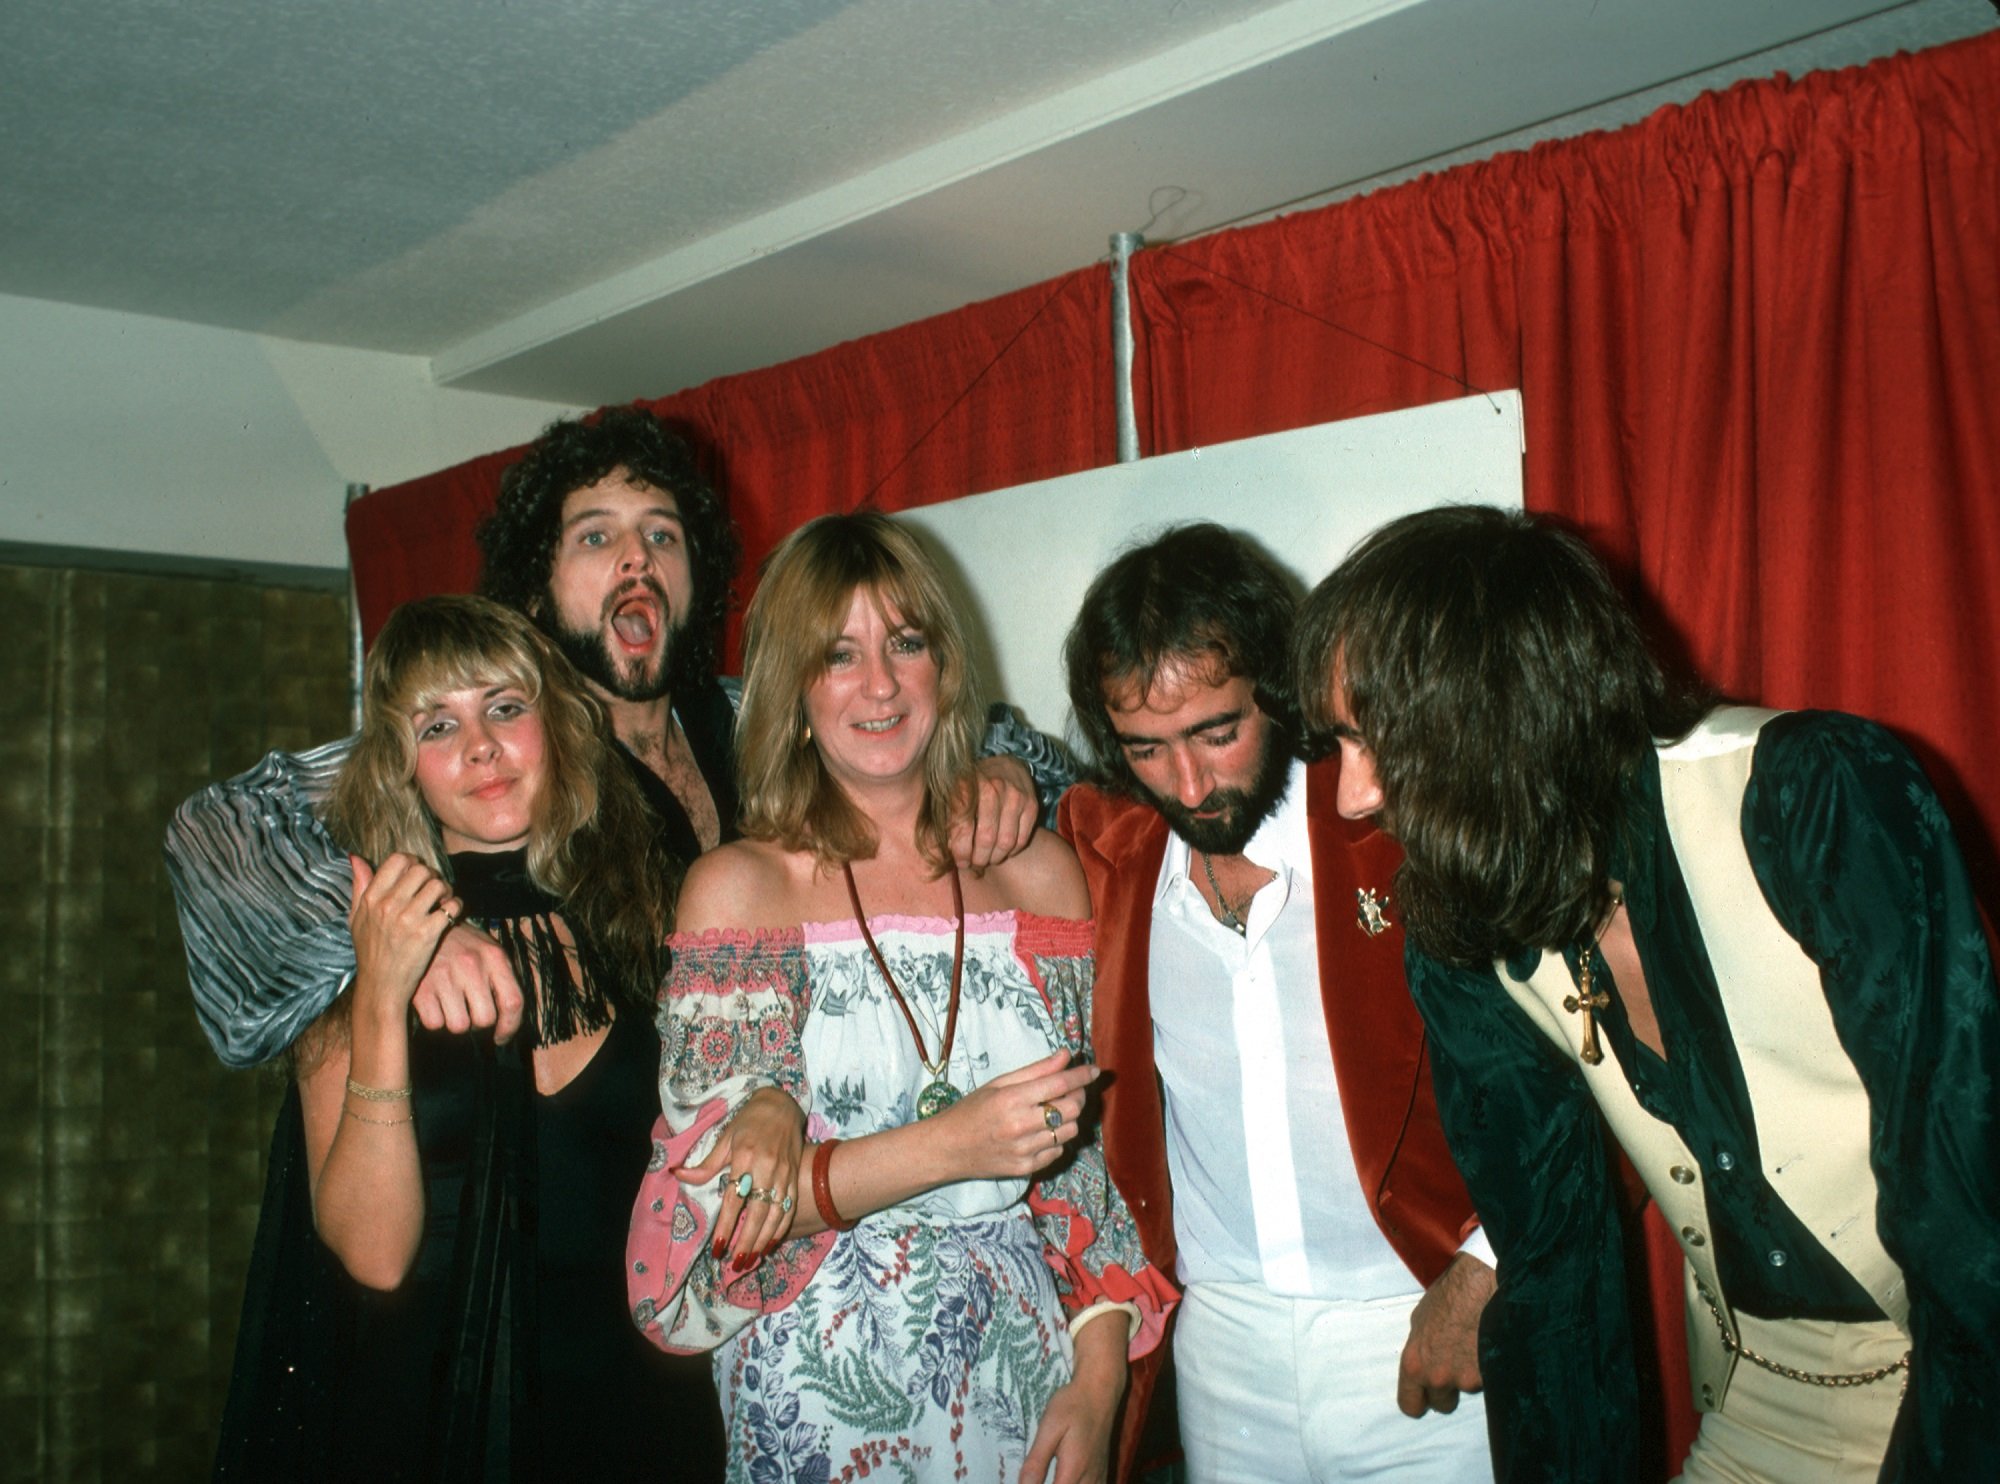 Mick Fleetwood Wanted ‘the Fantasy’ of All the Fleetwood Mac Members Being ‘Healed’ and Reunited